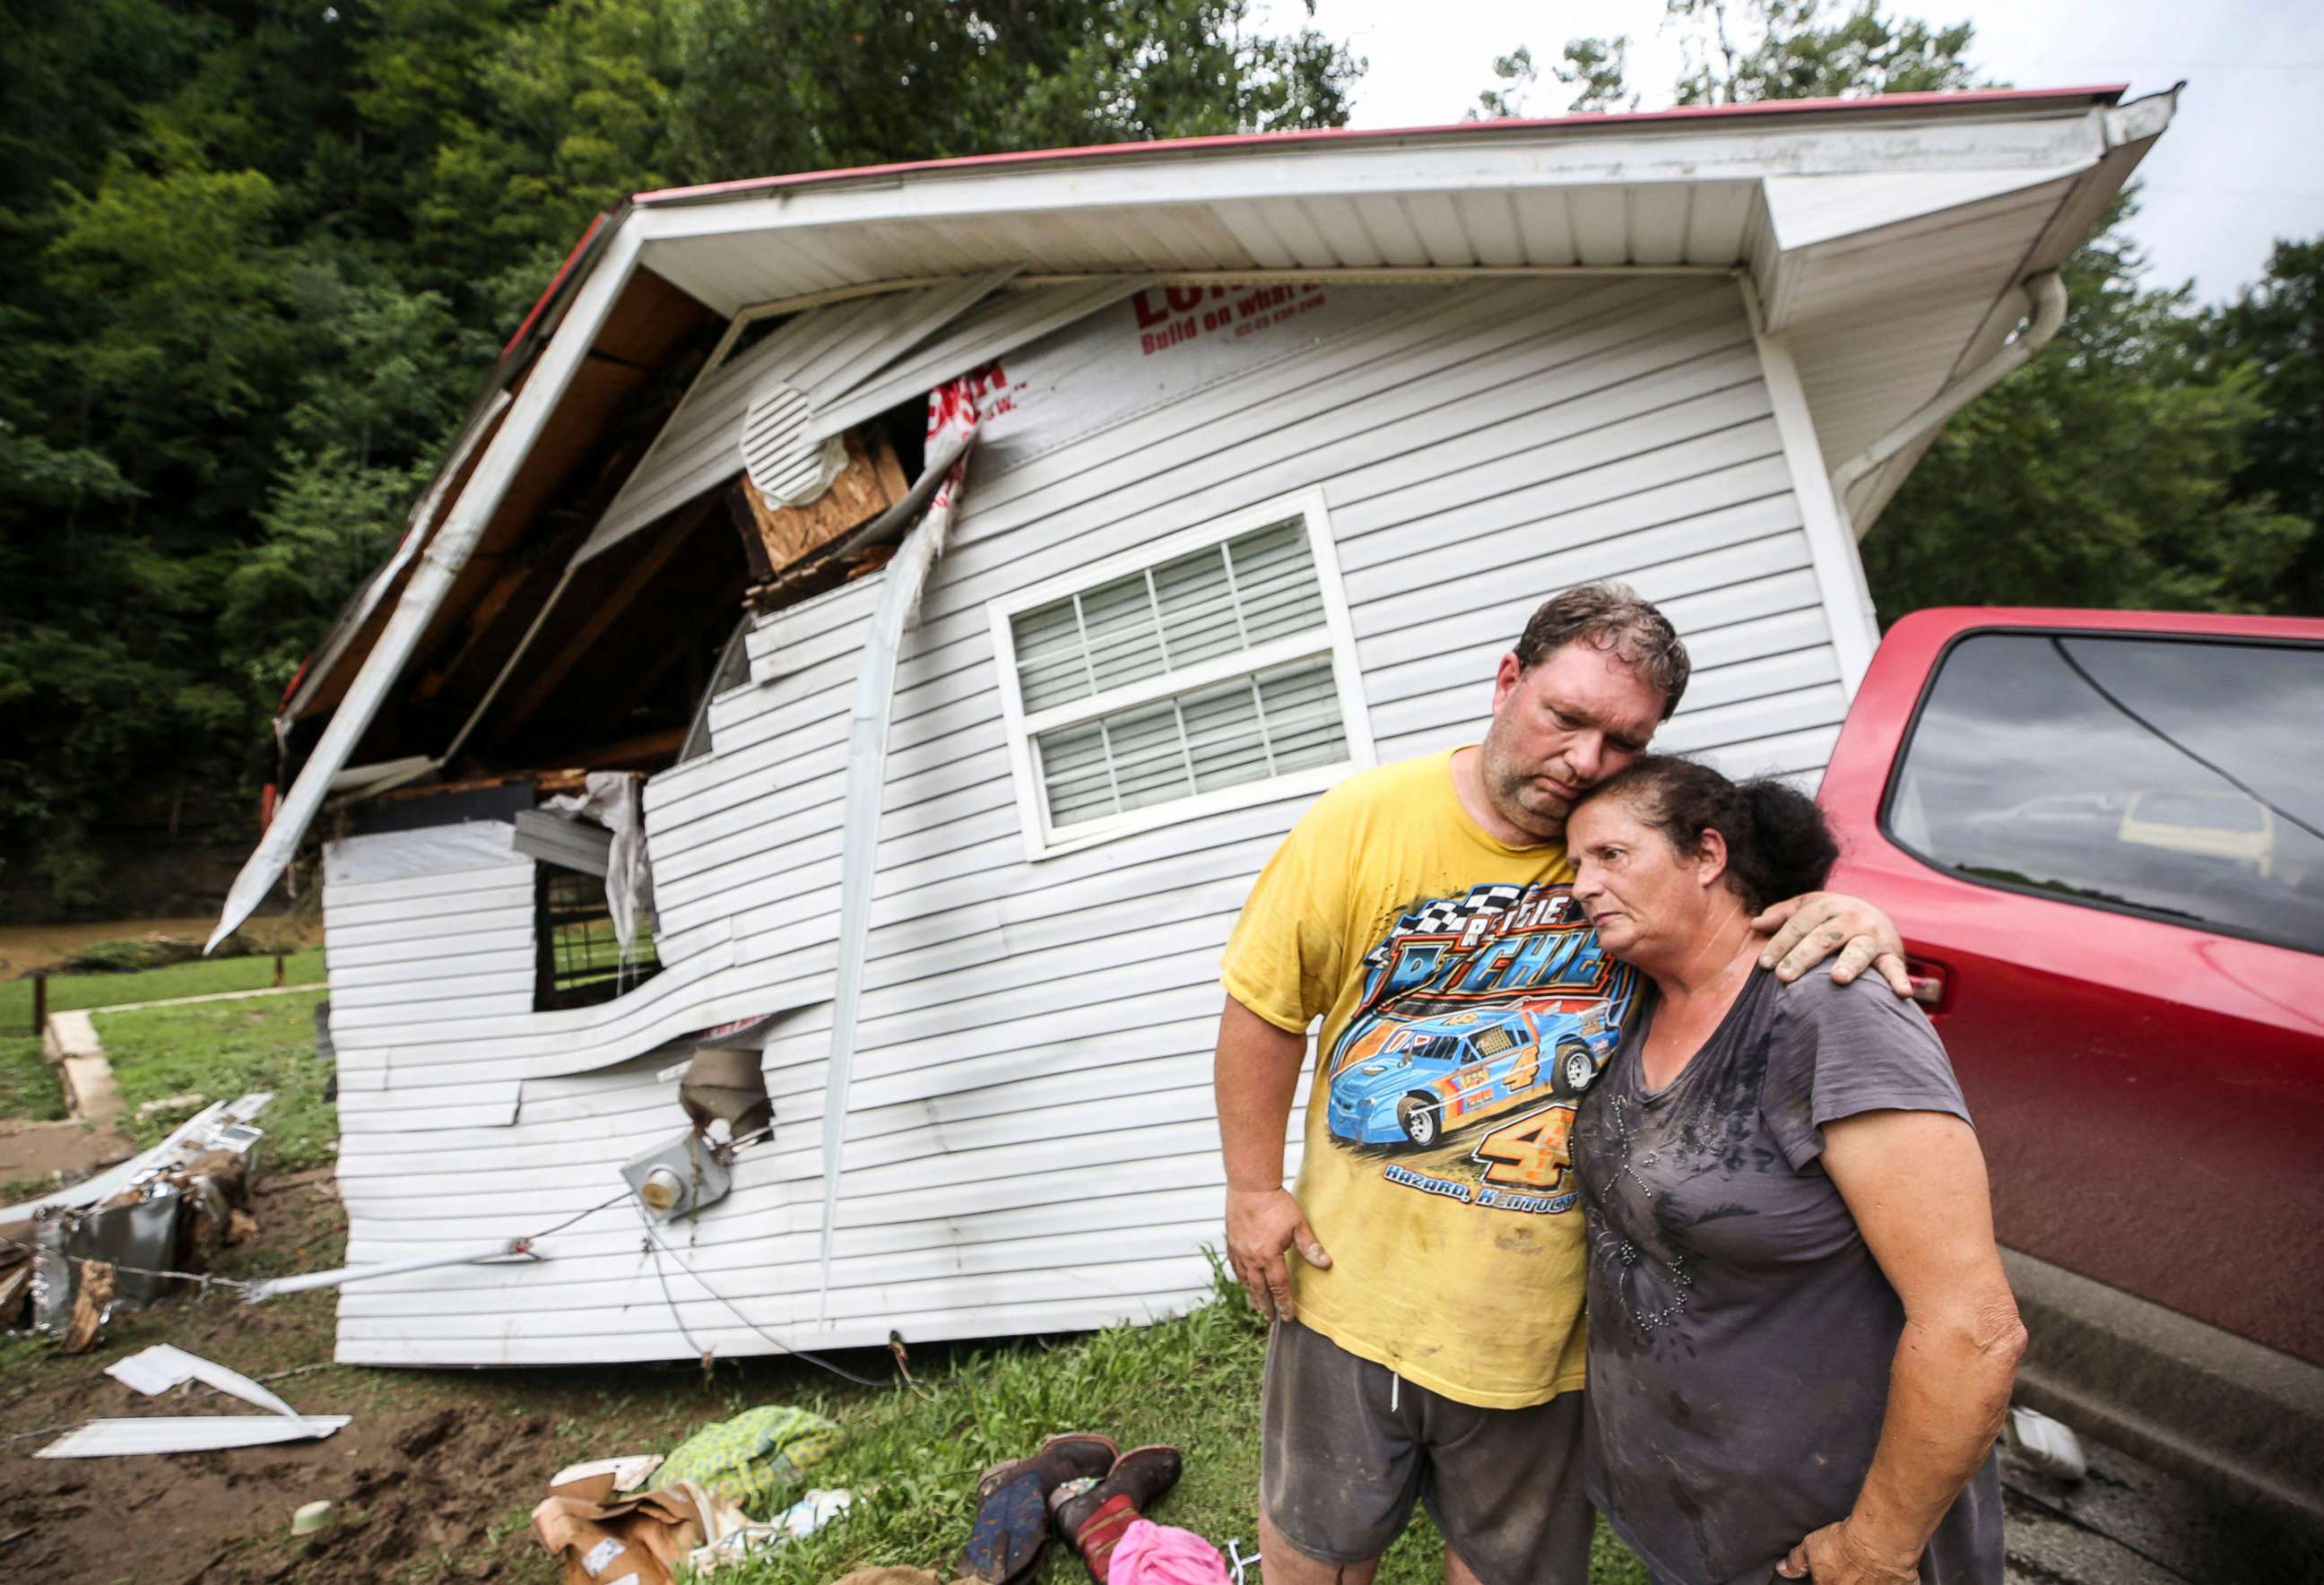 PHOTO: Reggie Ritchie comforts wife Della as they pause while clearing out their destroyed manufactured home destroyed by the flooding from Troublesome Creek behind them in Fisty, Ky., on July 29, 2022.